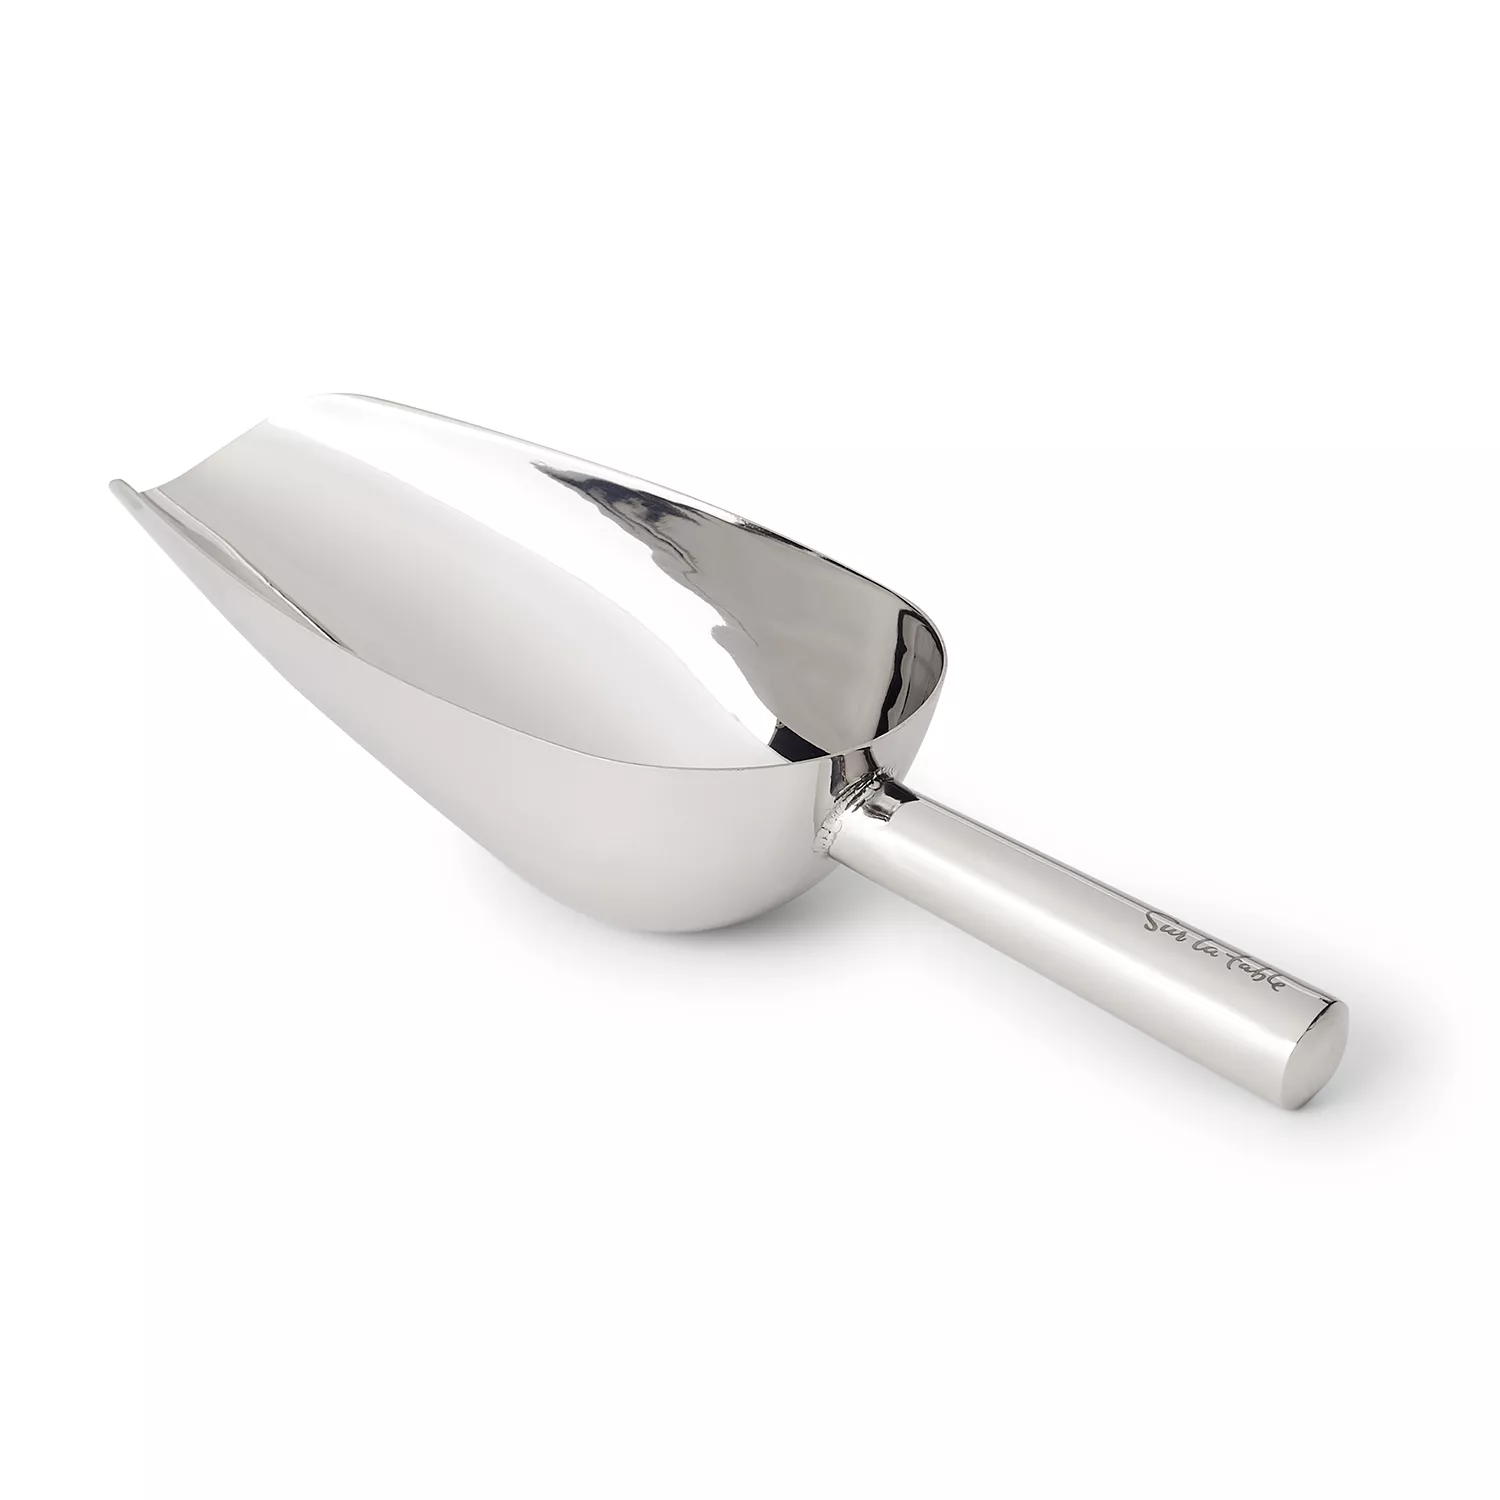 Sur La Table Stainless Steel Ice Cream Scoop, Silver